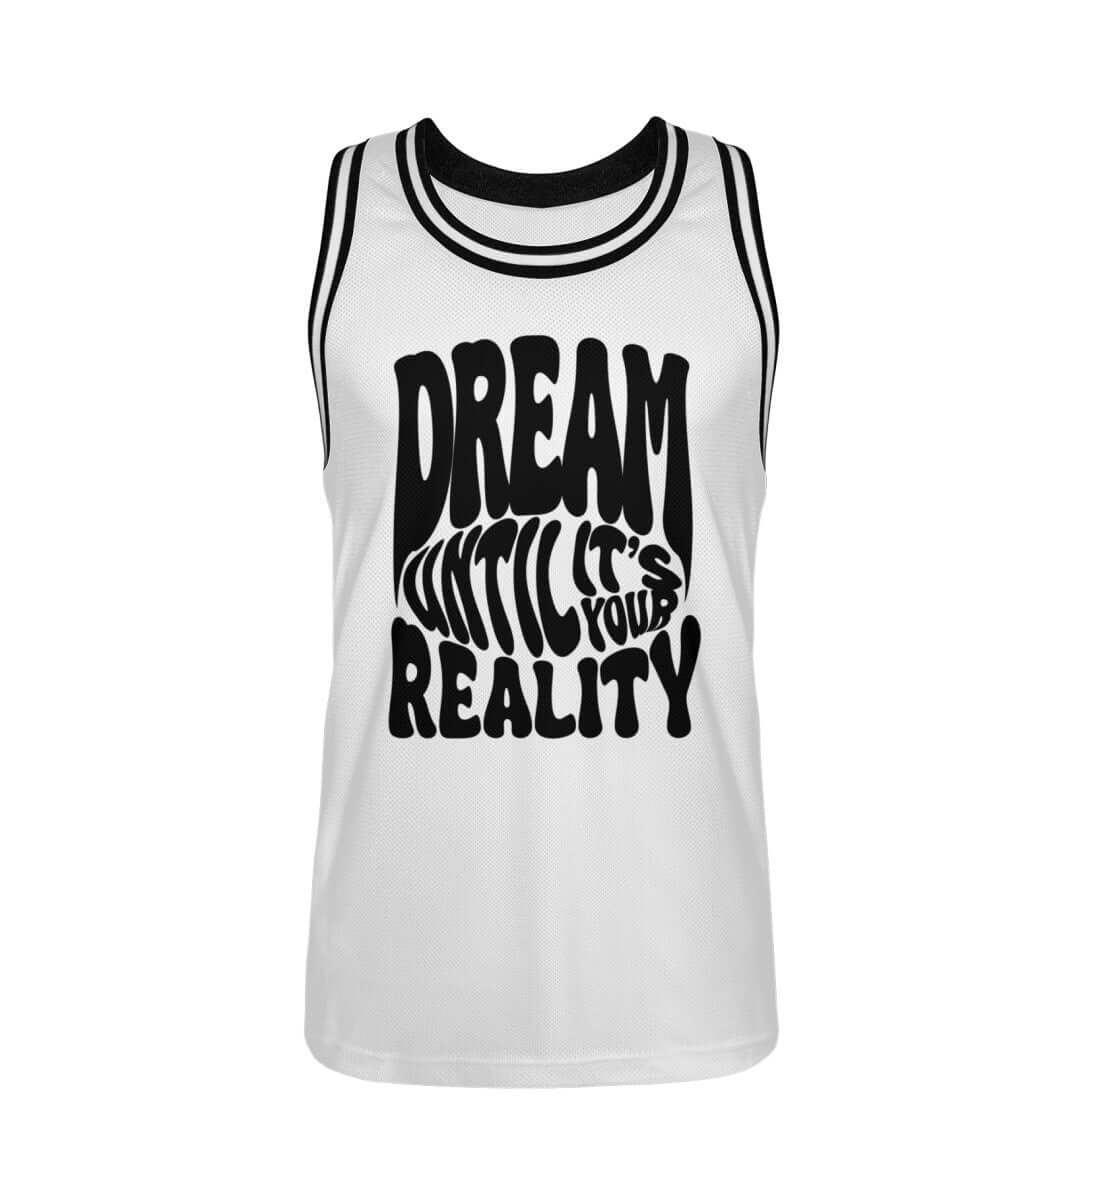 'DREAM UNTIL IT'S YOUR REALITY' BASKETBALL TRIKOT